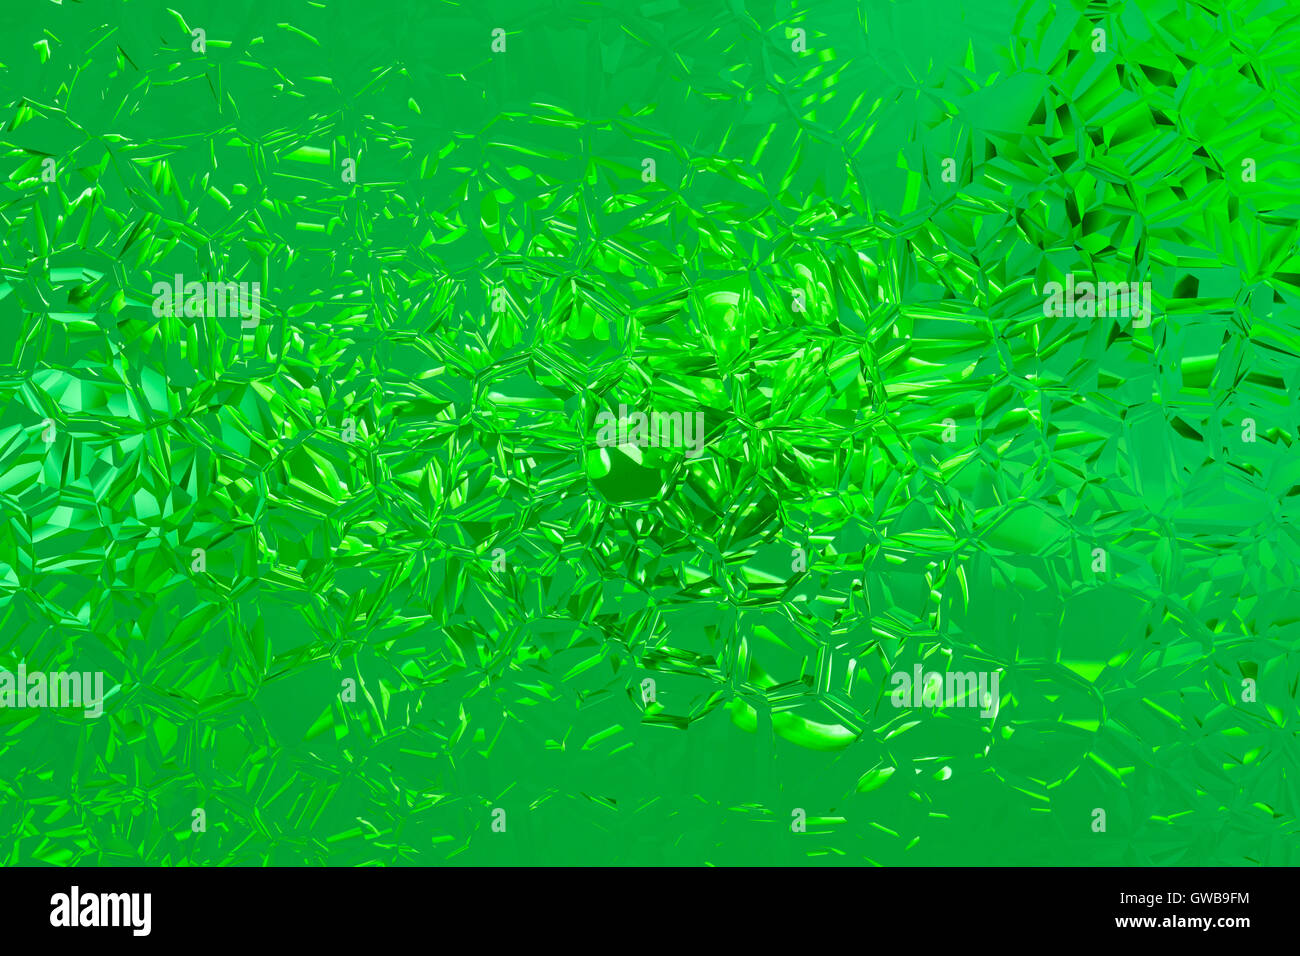 An abstract eco green glassy mosaic background with a  pattern of lines and spots. Can be used as a wallpaper. Stock Photo